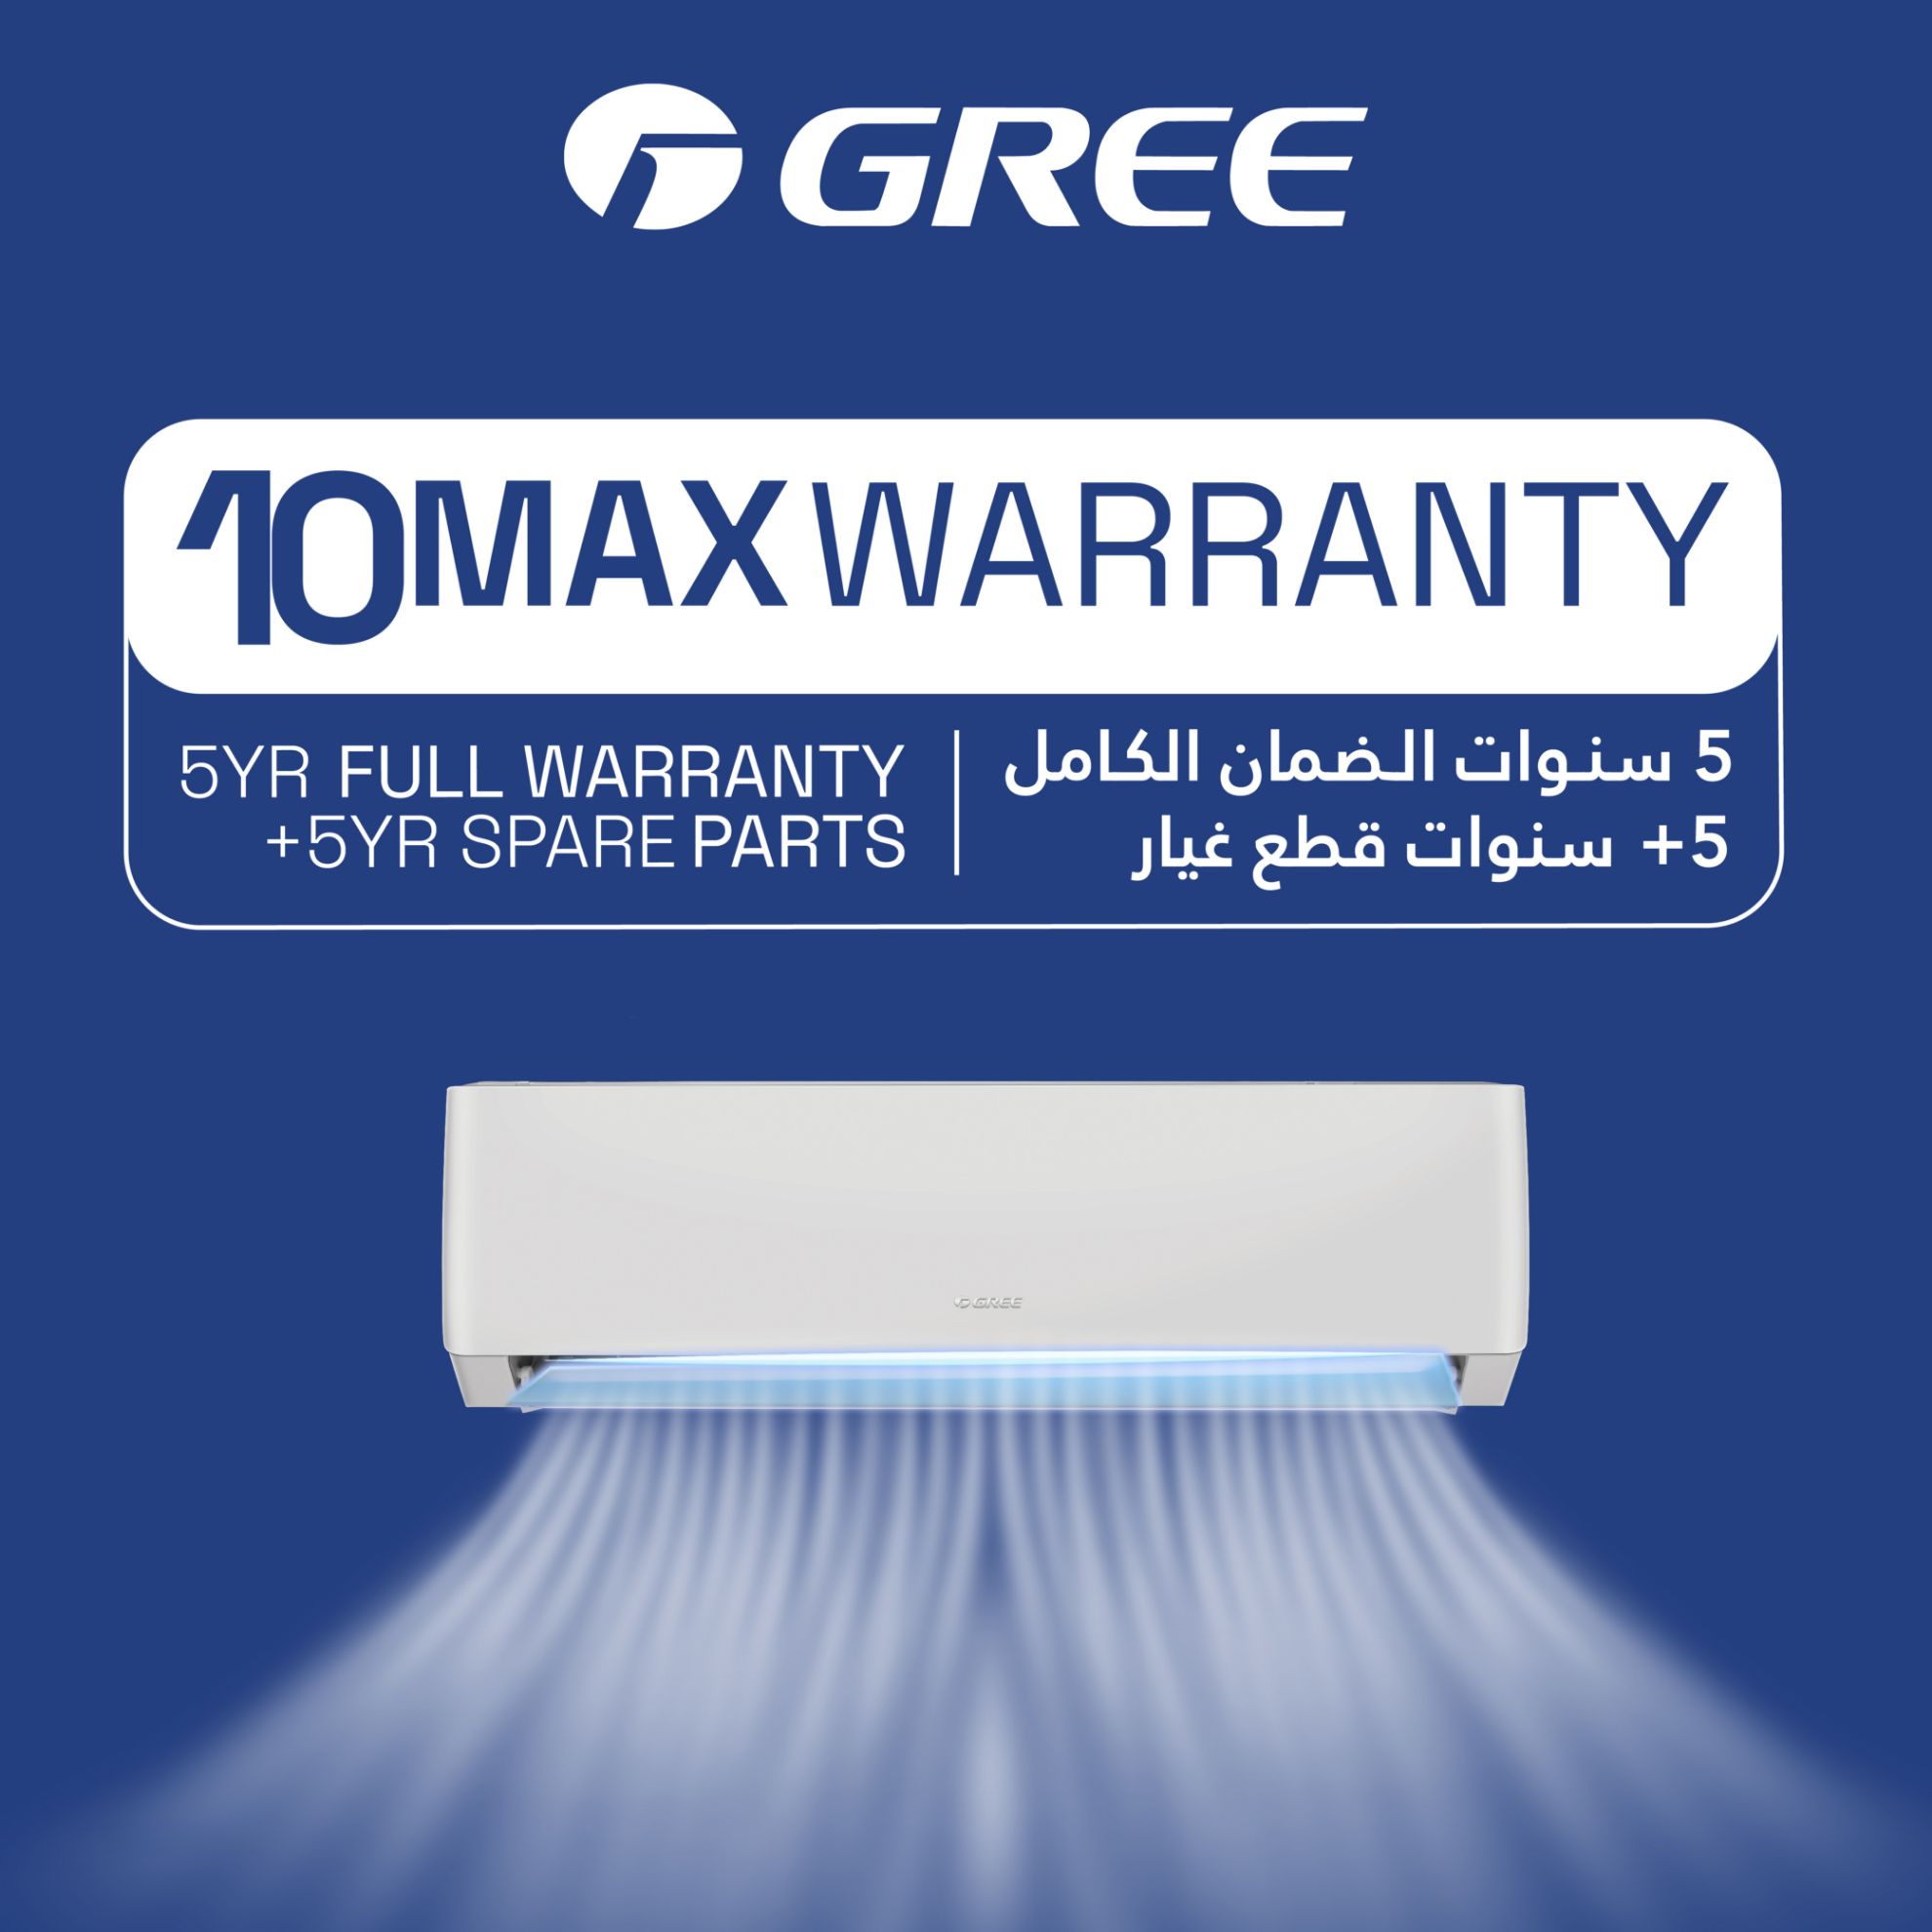 Picture of Gree - iSAVE PLUS-12C3 - 1 Ton|Inverter|Wall Split AC